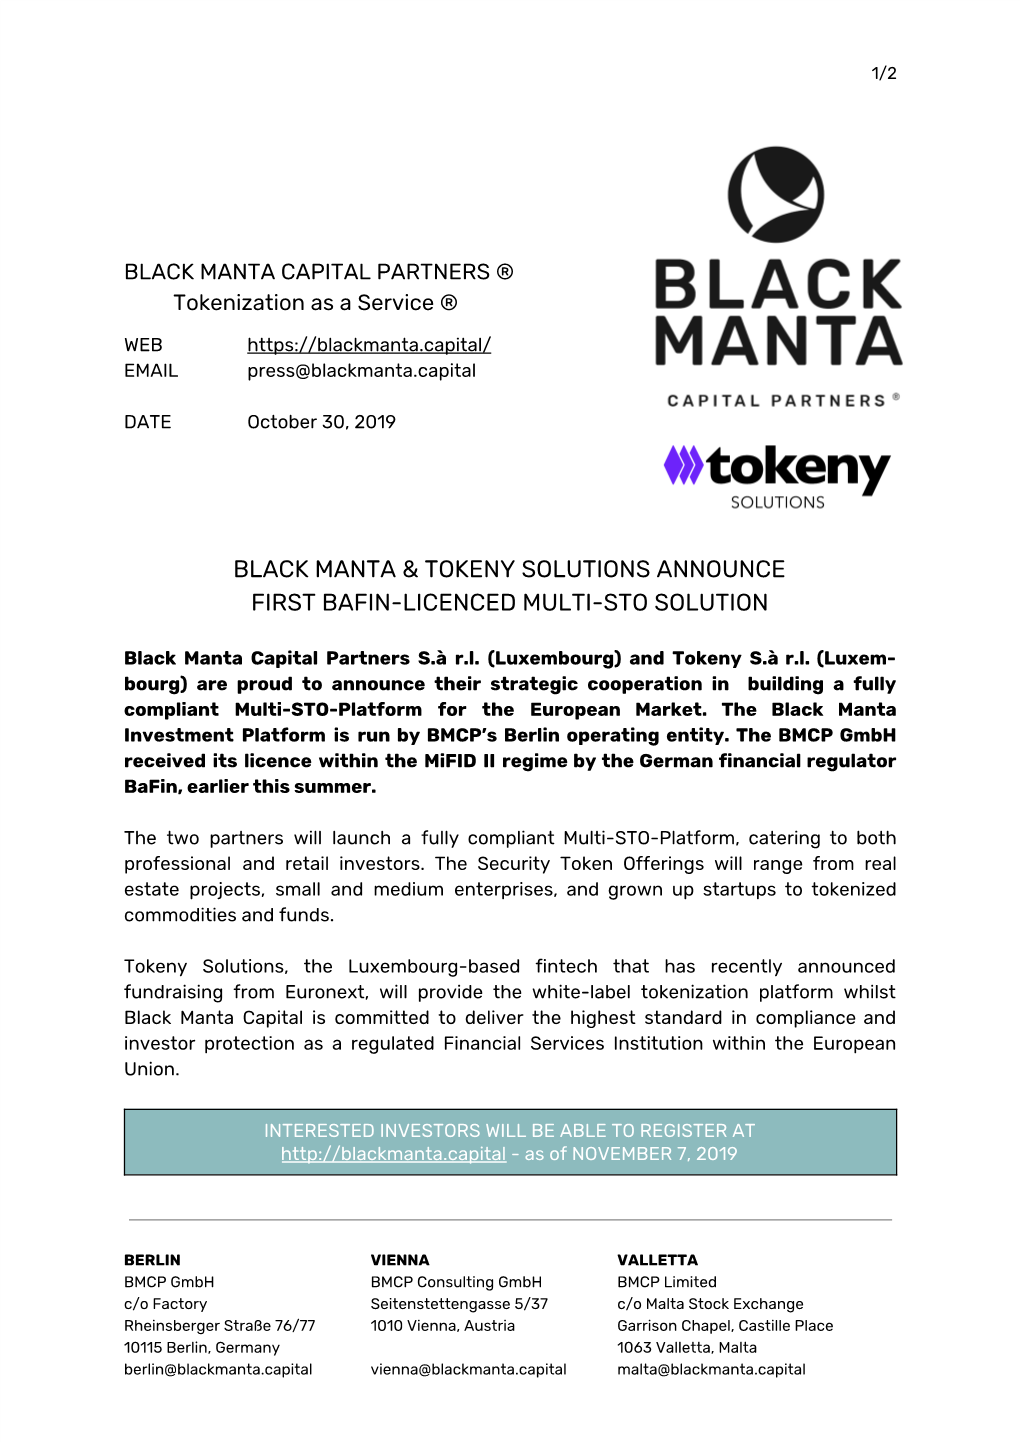 Black Manta & Tokeny Solutions Announce First